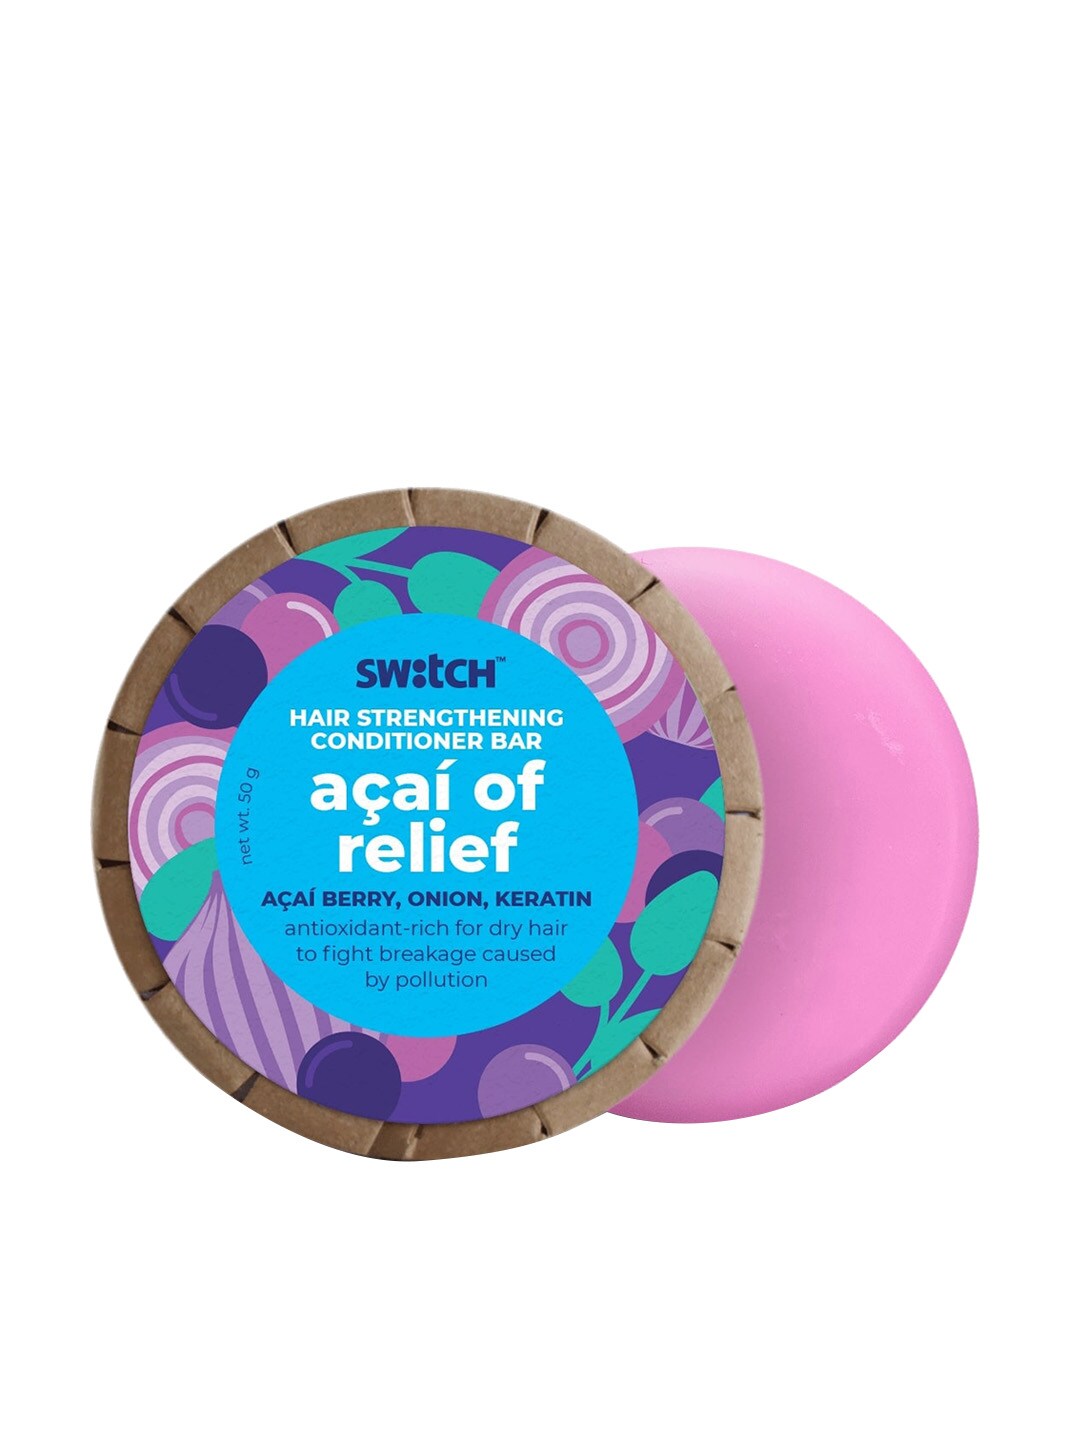 The Switch Fix Strengthening Acai of Relief Conditioner Bar for Dry Hair - 50g Price in India